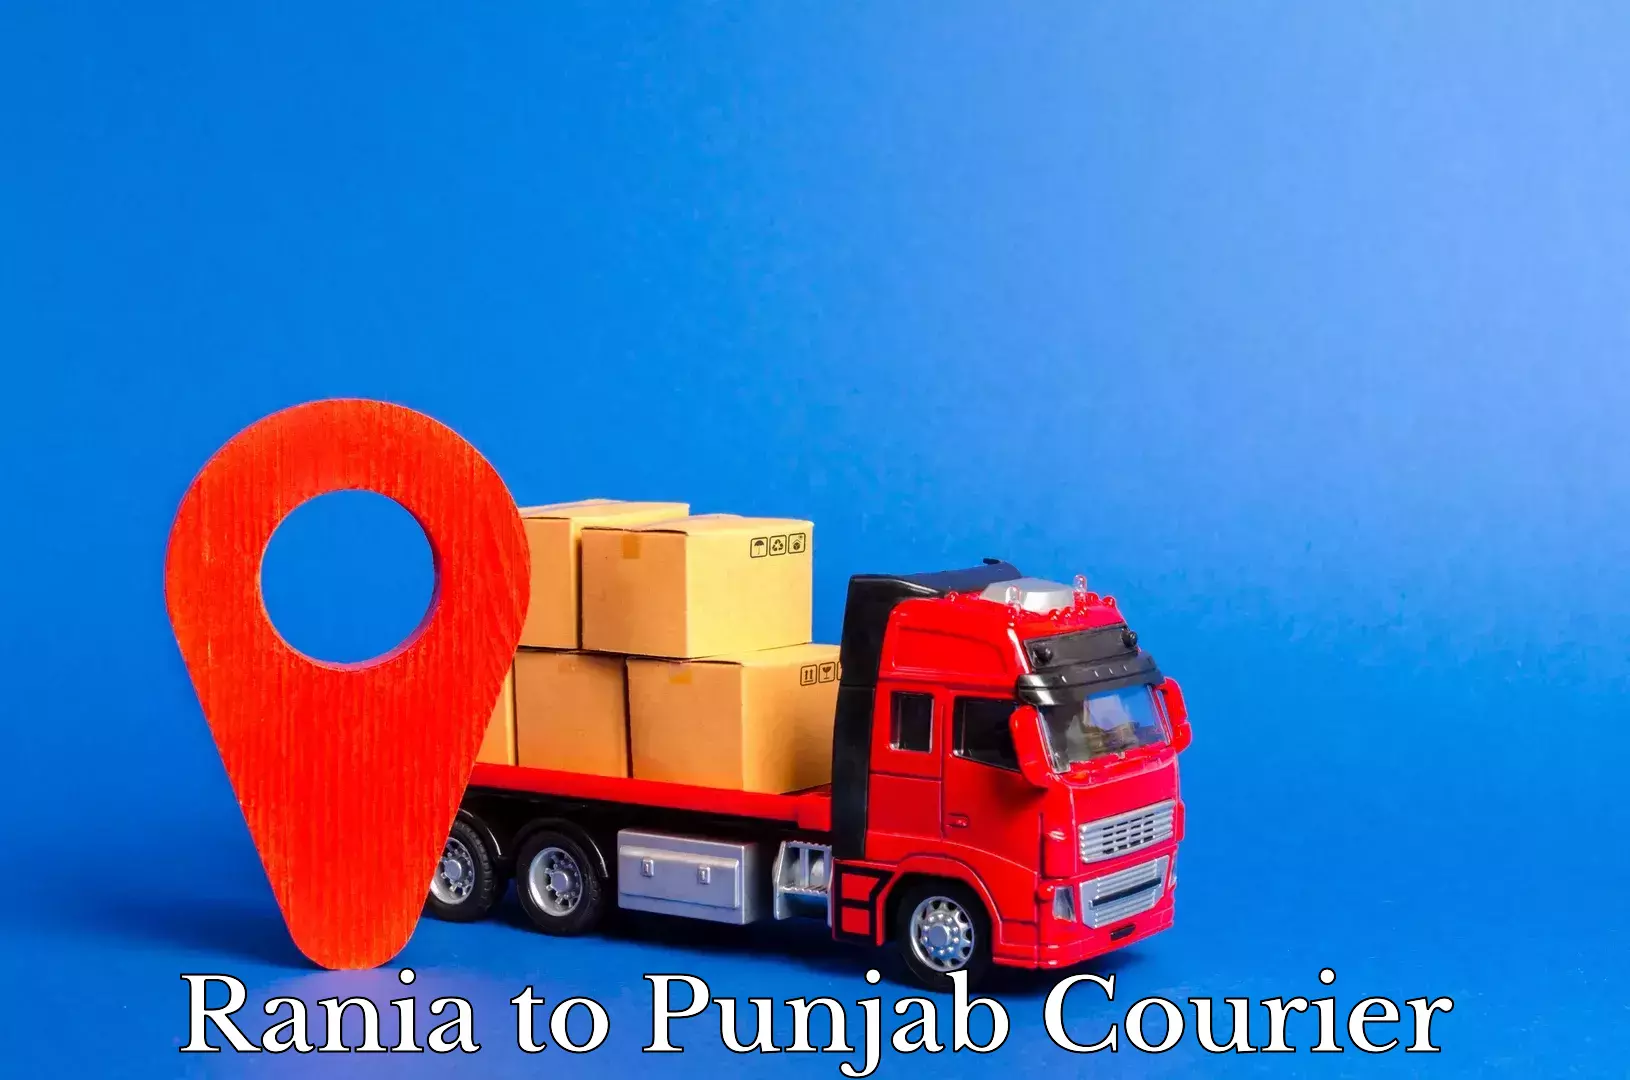 24-hour courier service Rania to Punjab